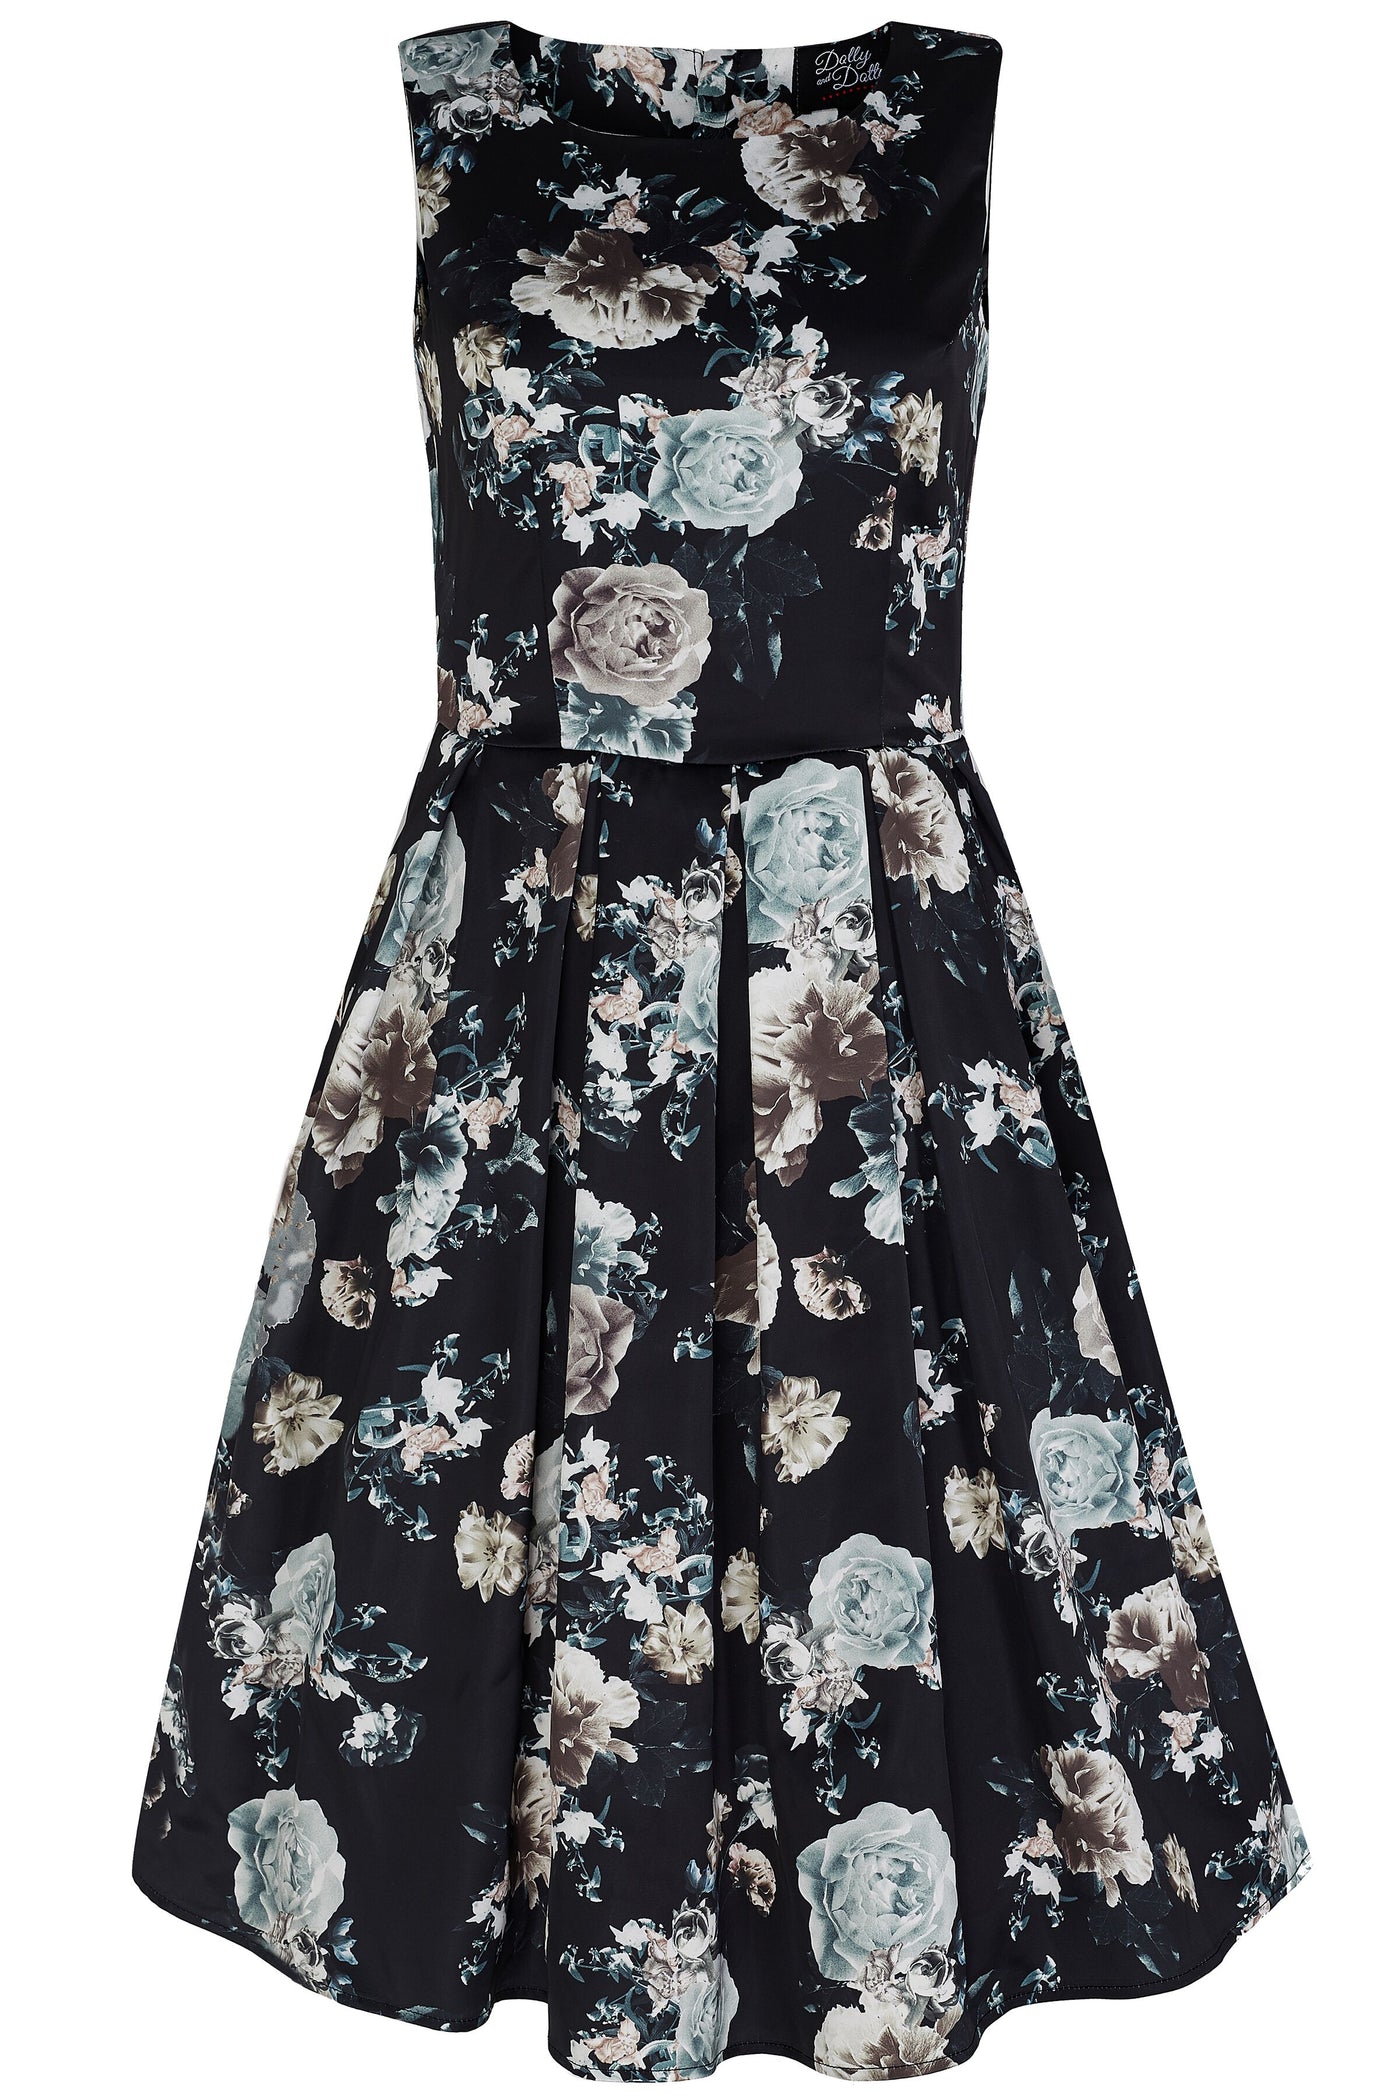 Annie Raising Floral Swing Dress in Black with White Roses